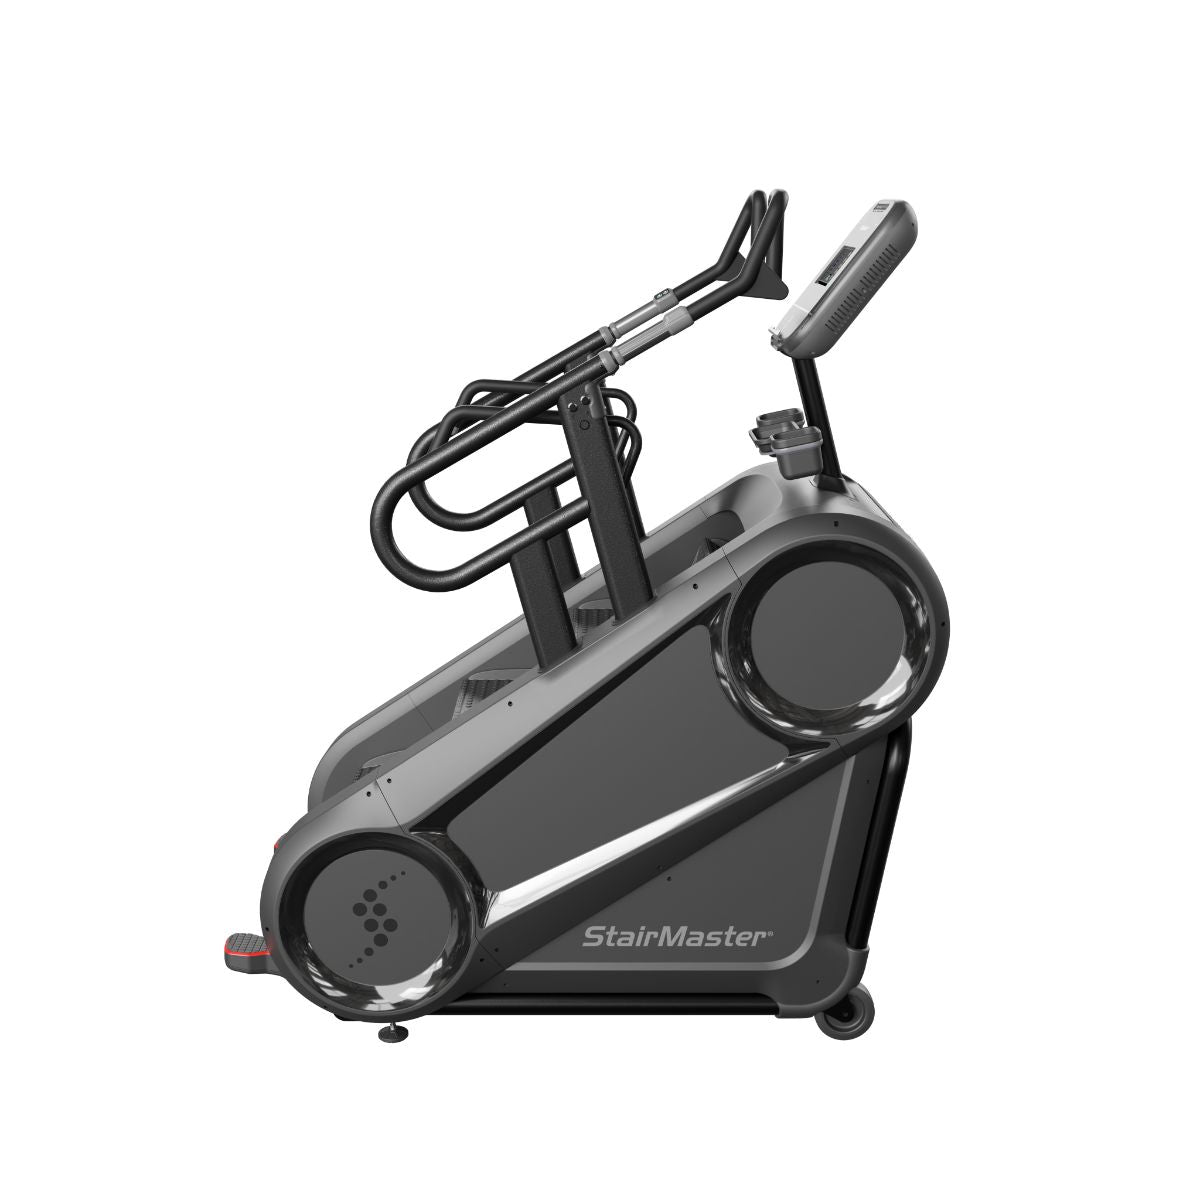 Stairmaster 10G Stair Climber